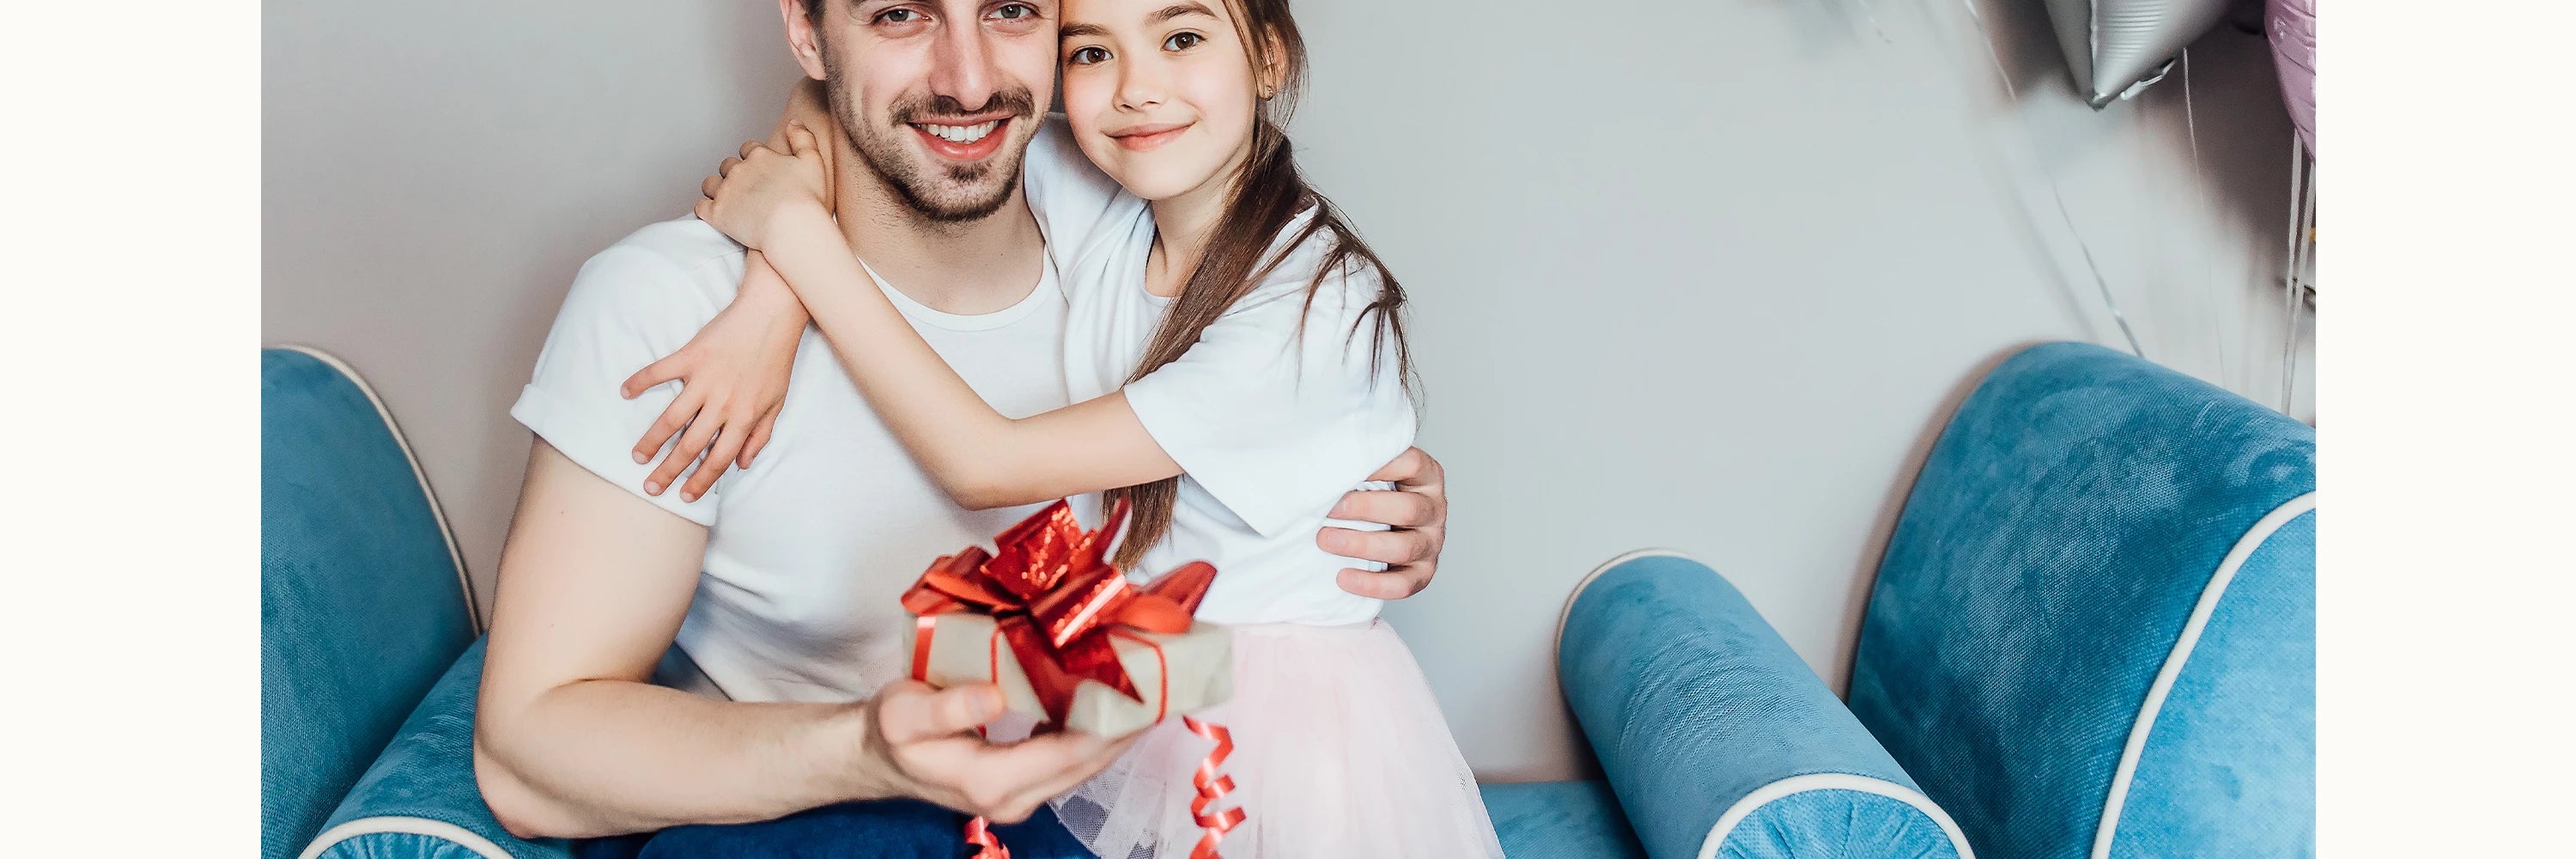 Best Gifts for Every Type of Dad - NewEleven